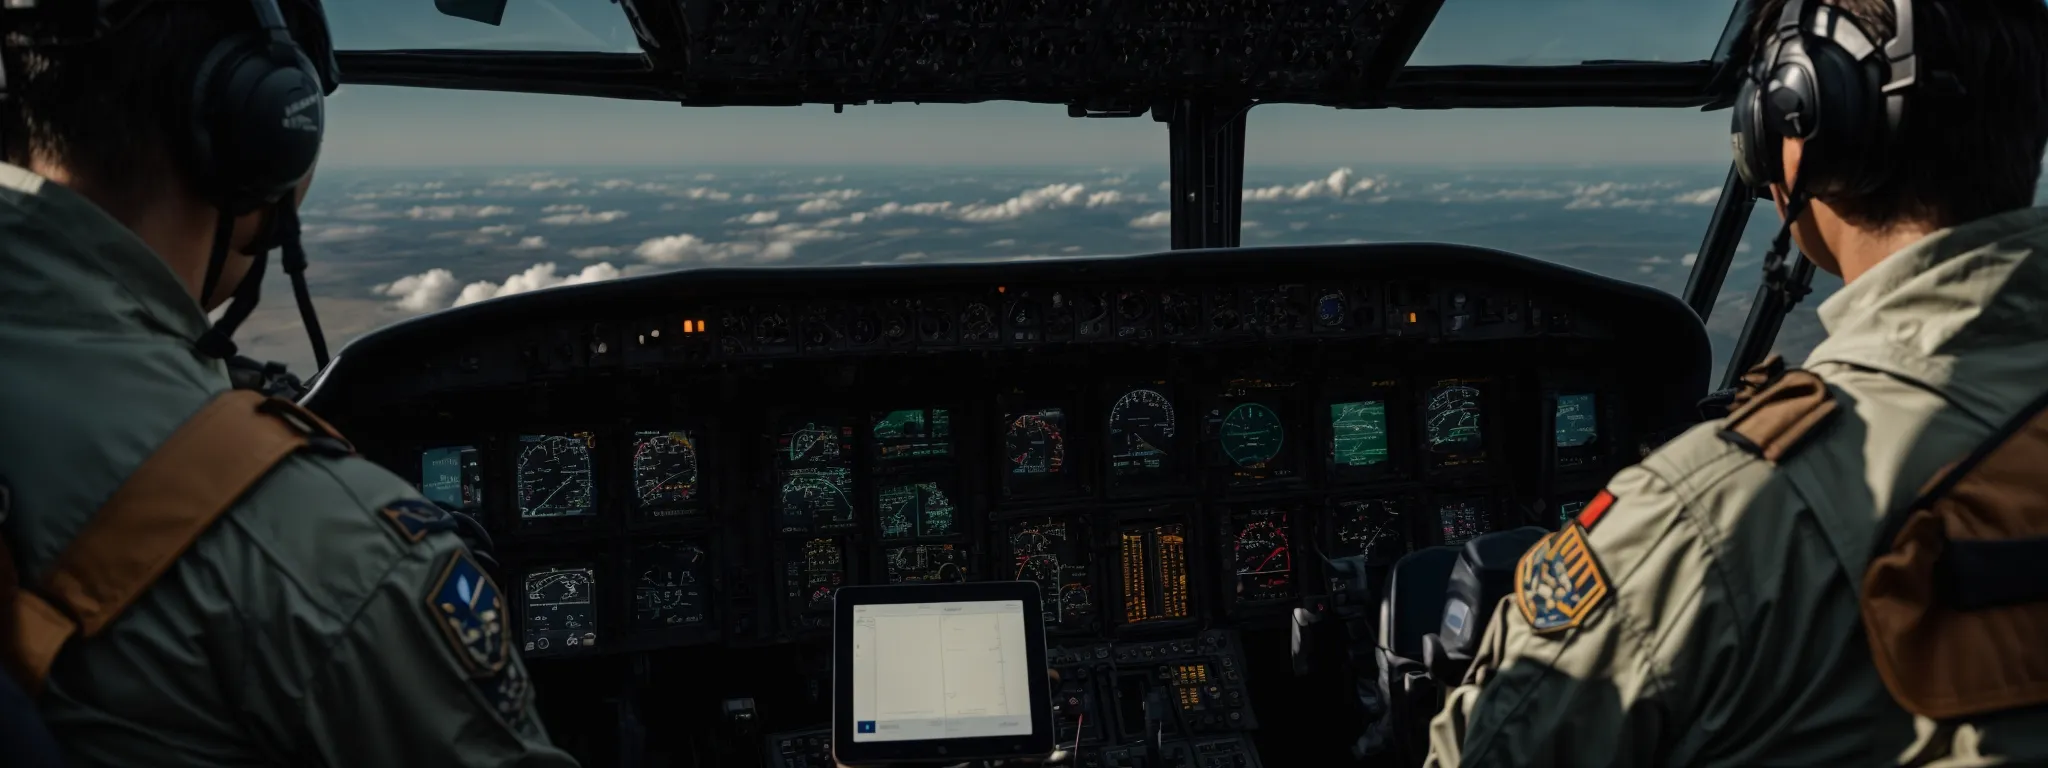 a pilot consults a digital tablet in the cockpit, symbolizing the aviation industry's adaptation to evolving seo tactics.